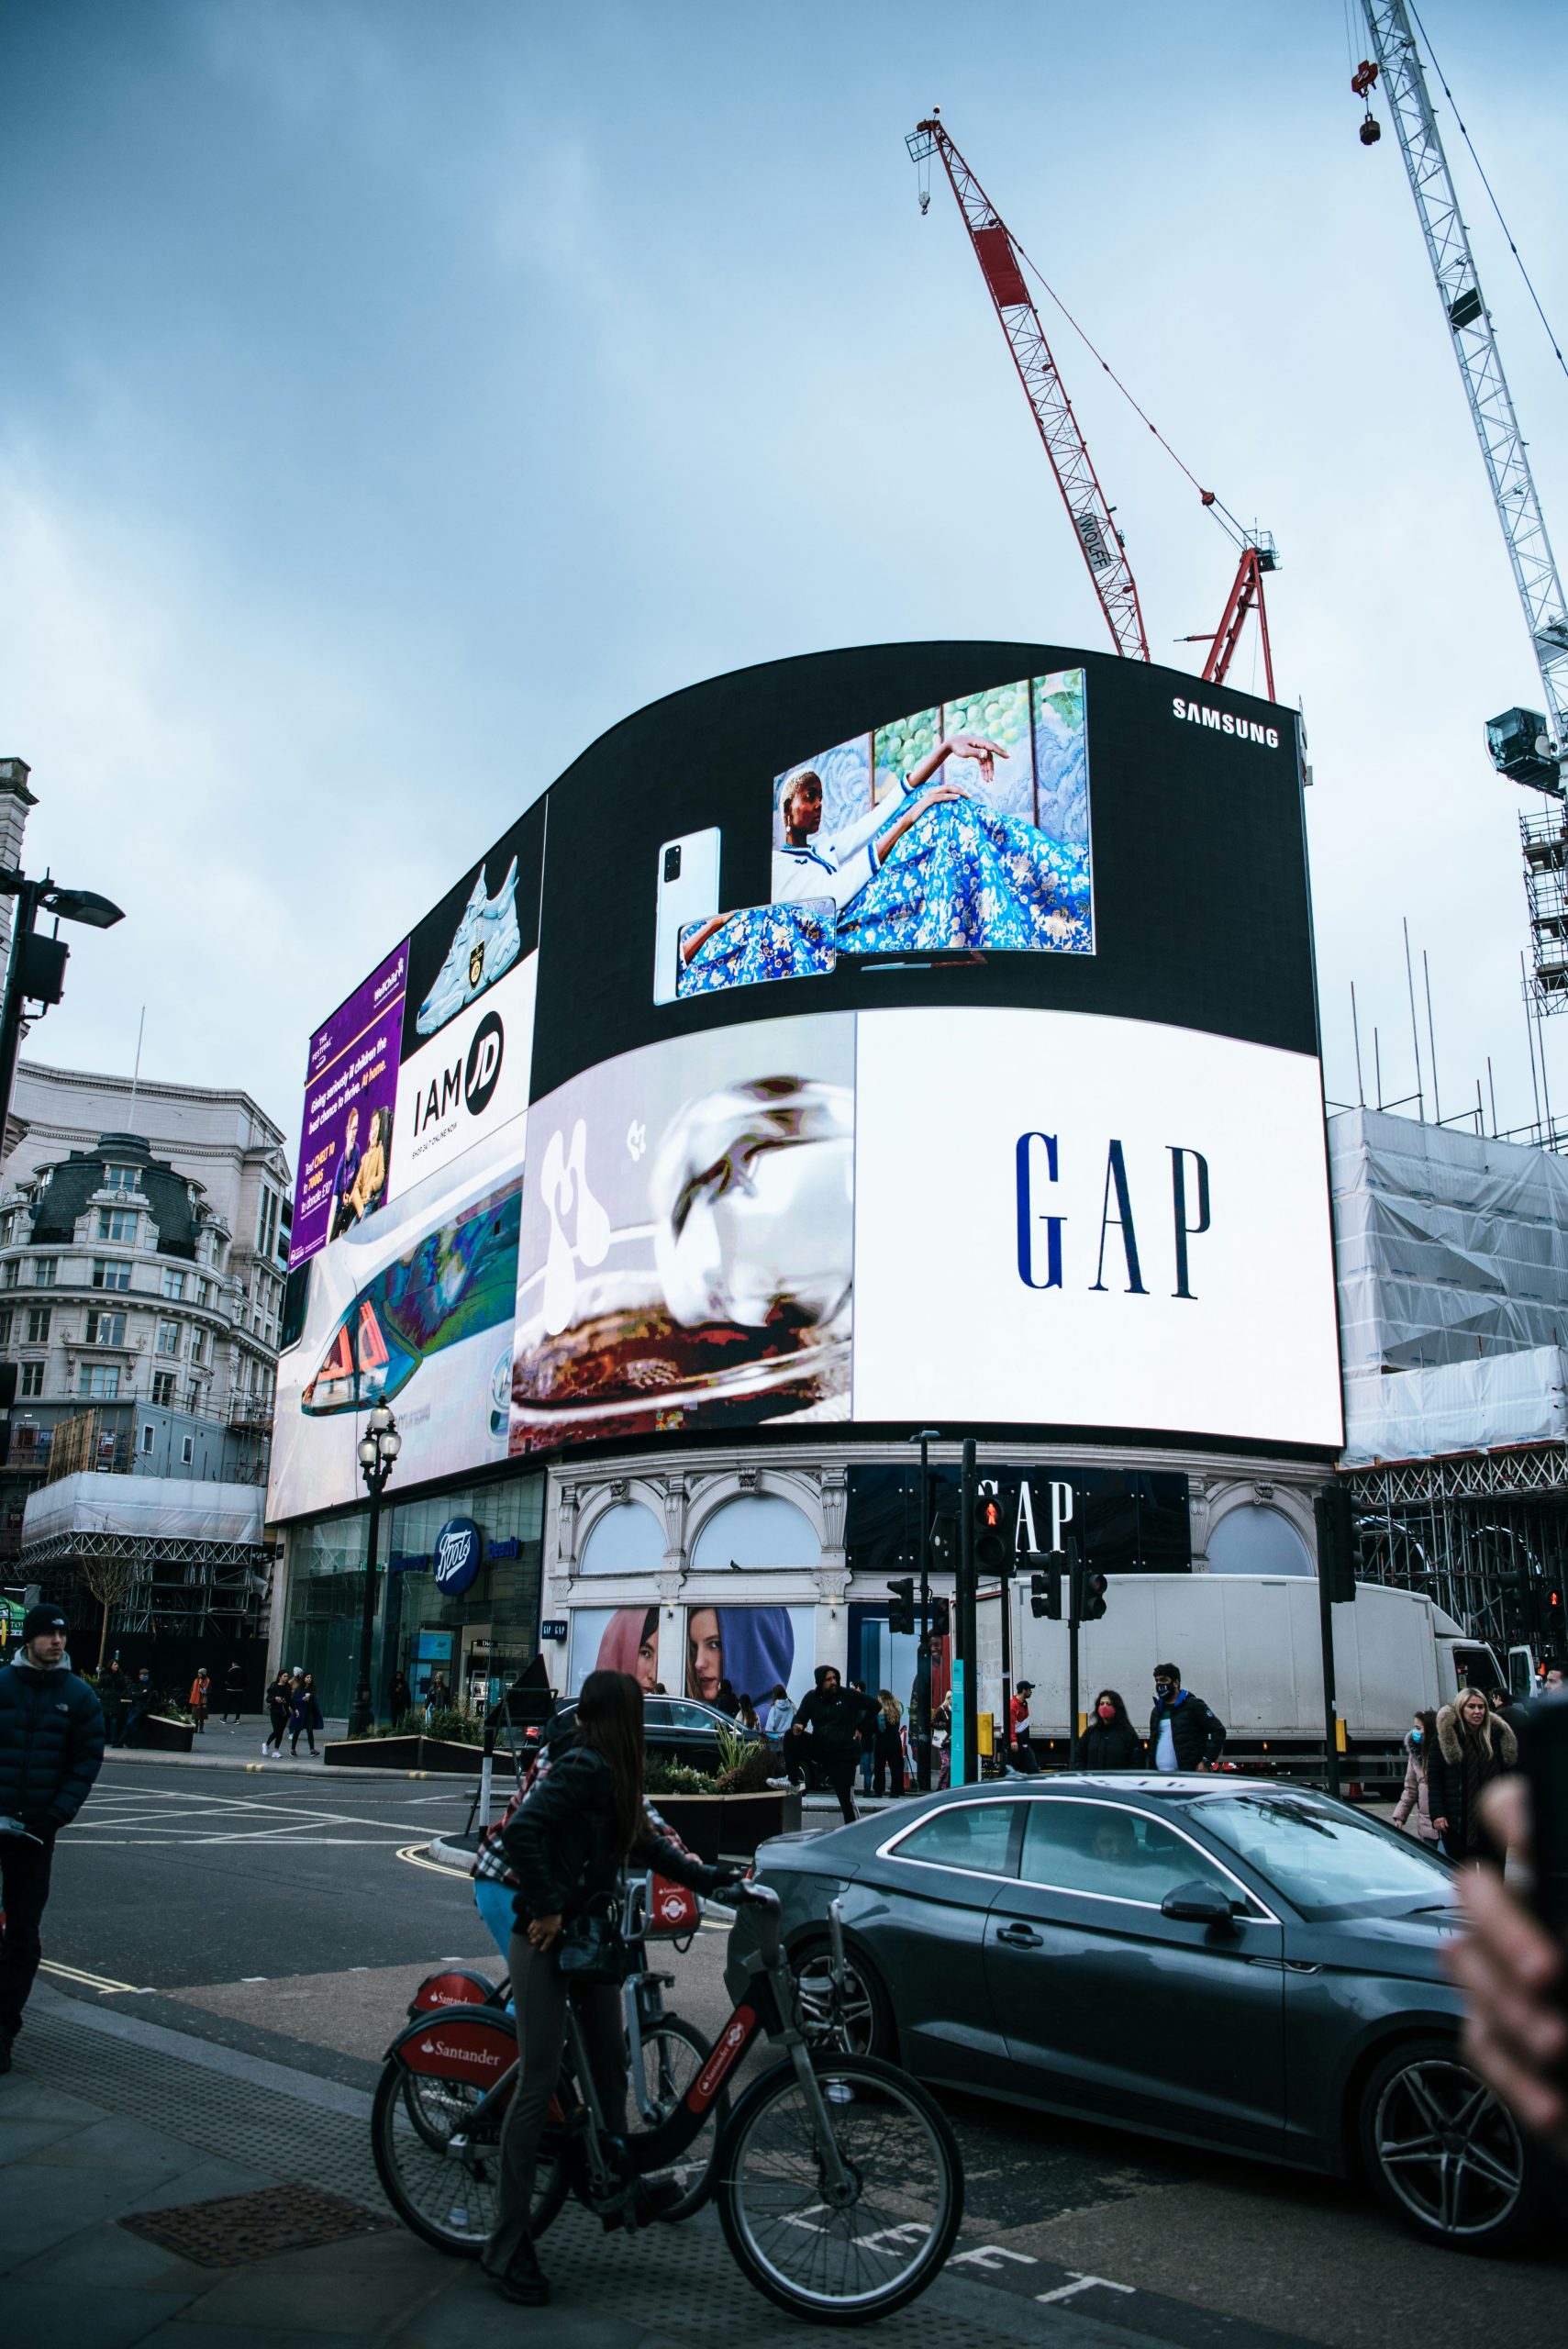 piccadily circus adverts scaled